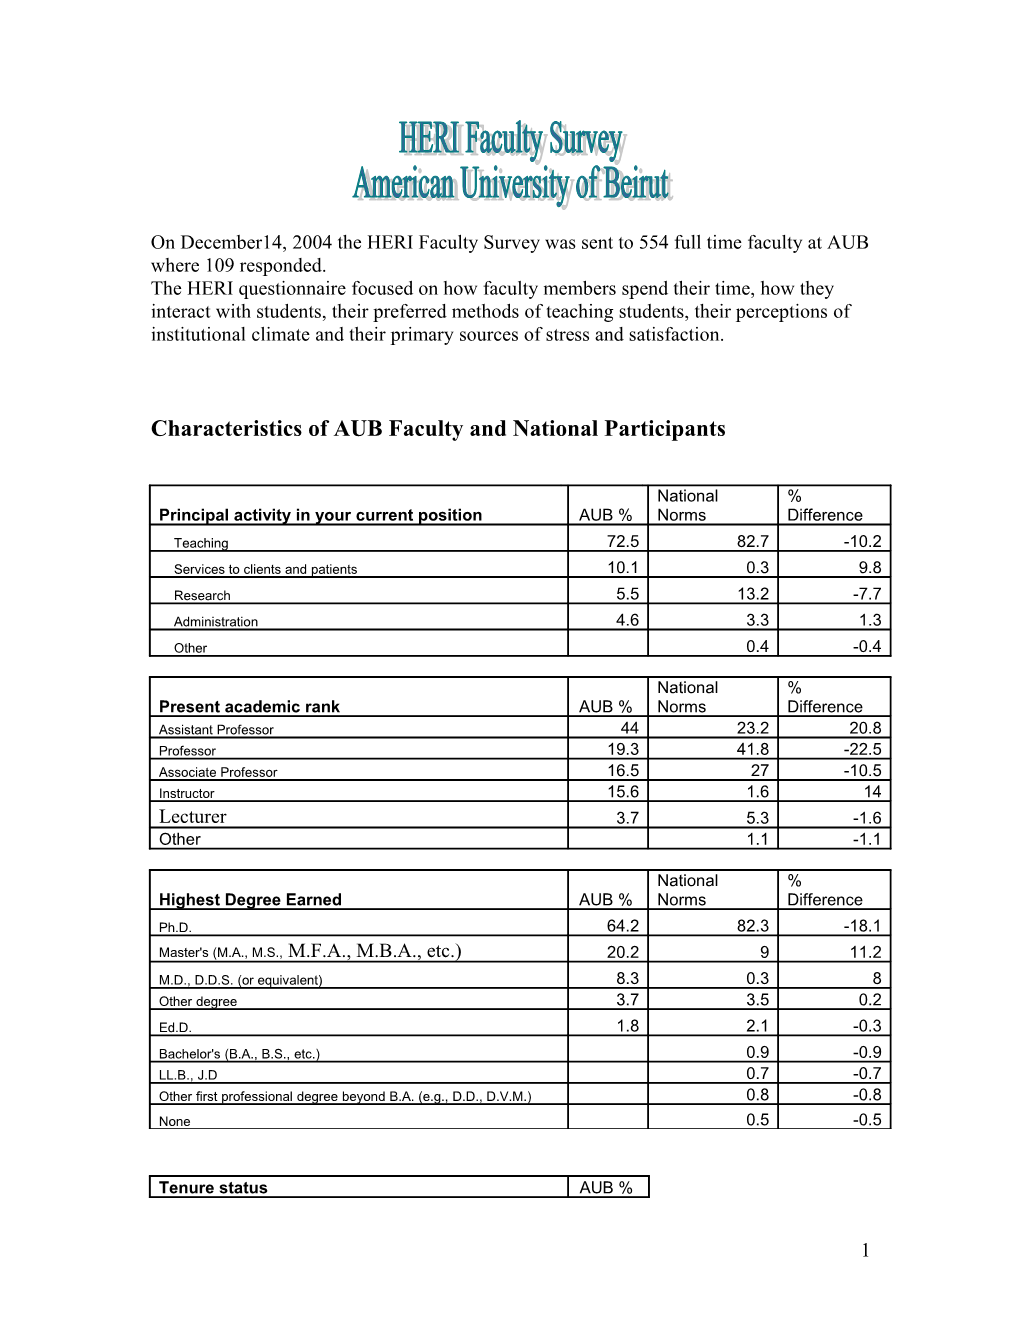 Characteristics of AUB Faculty and National Participants